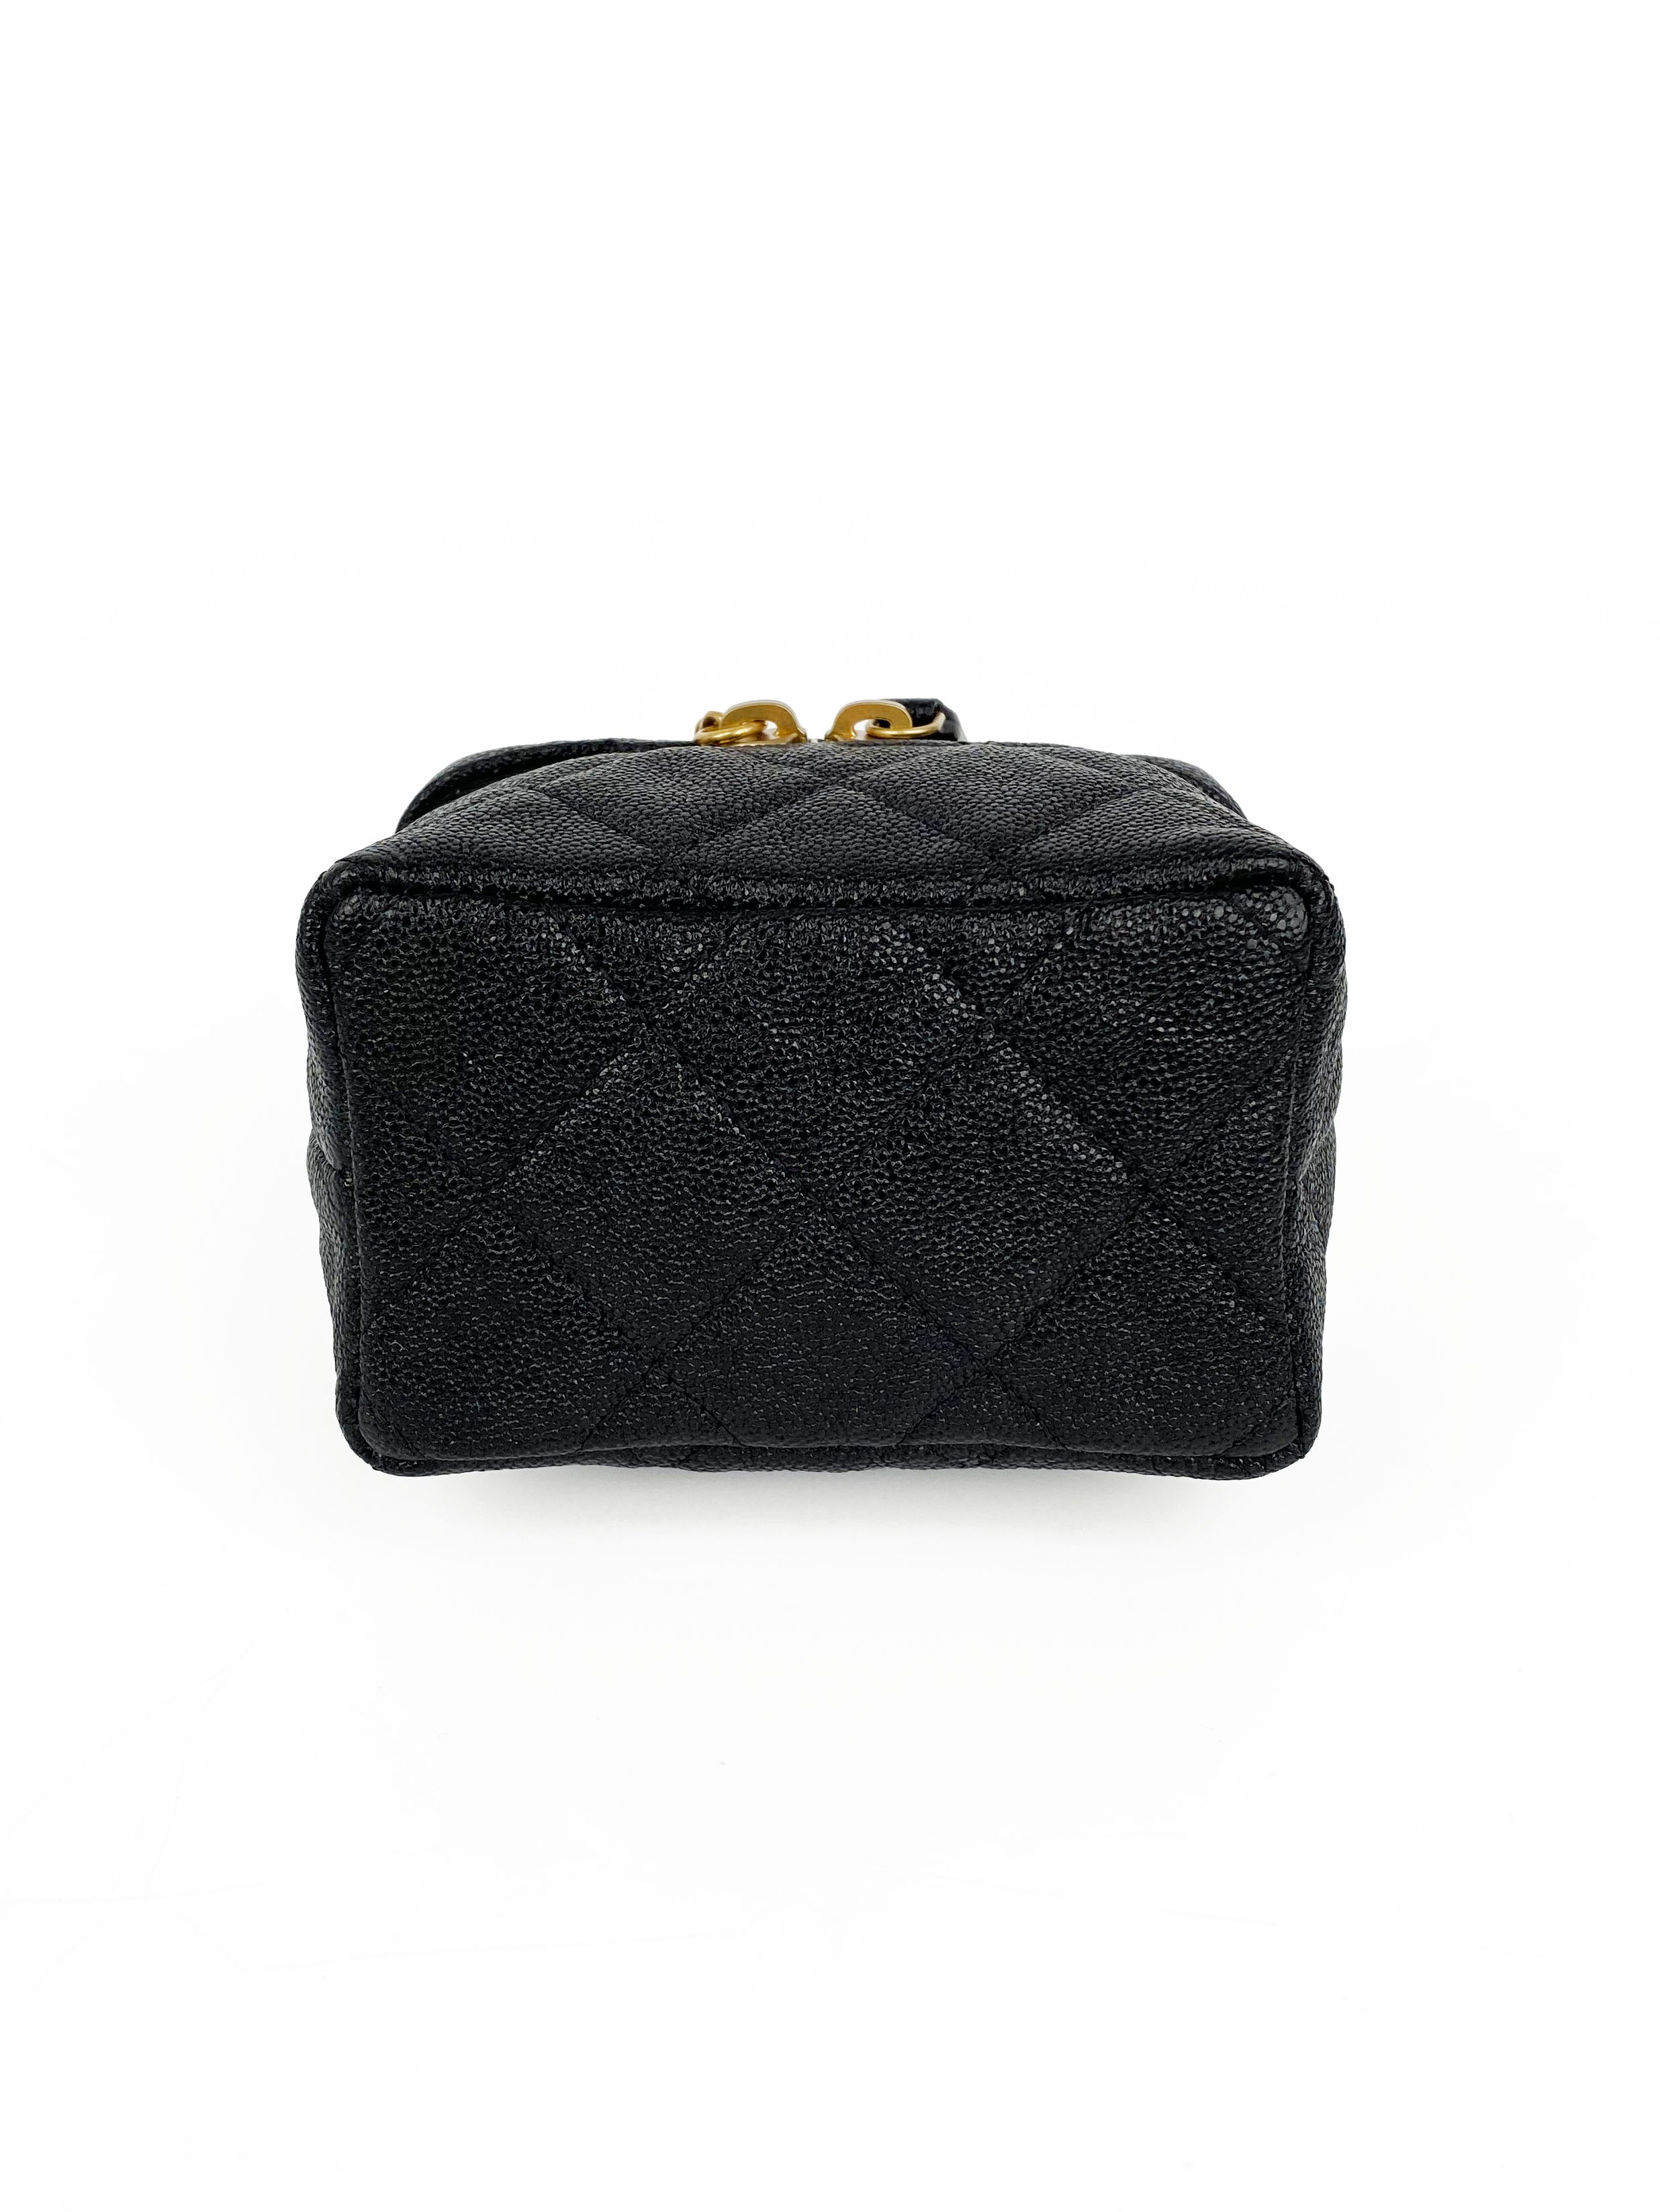 Chanel Black Quilted Caviar Mini Vanity Bag